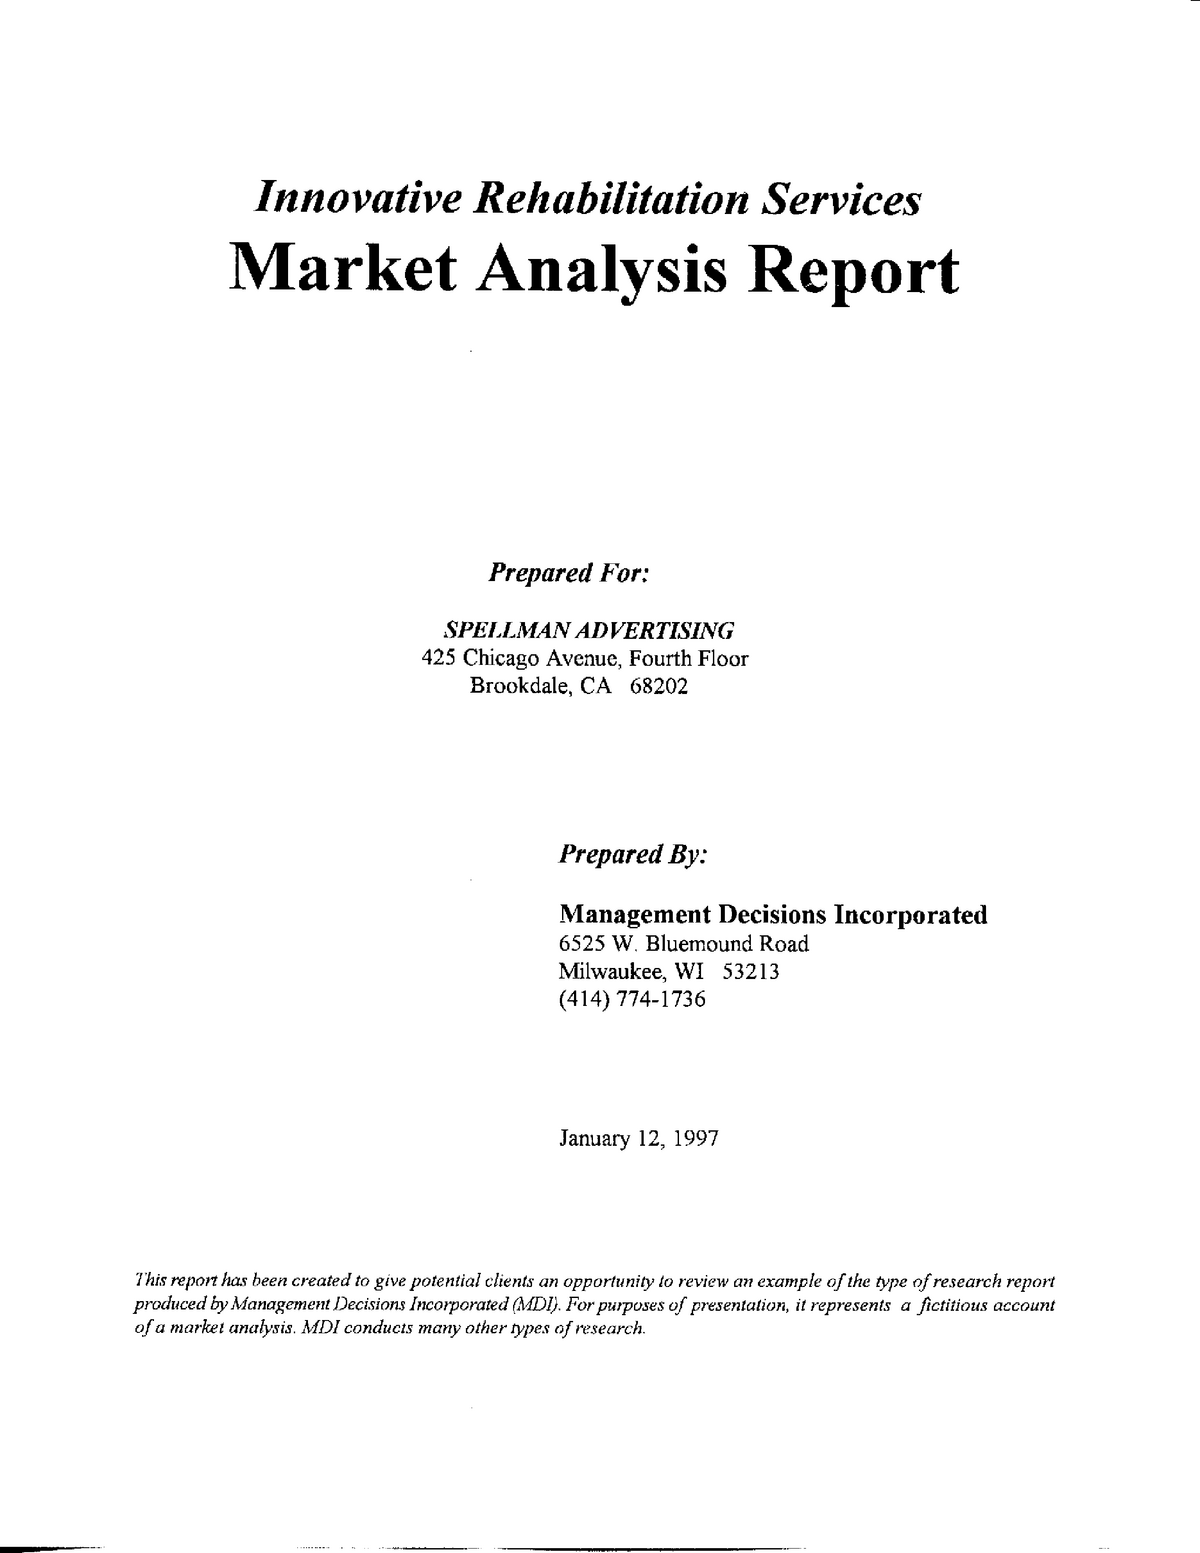 how to cite a market research report